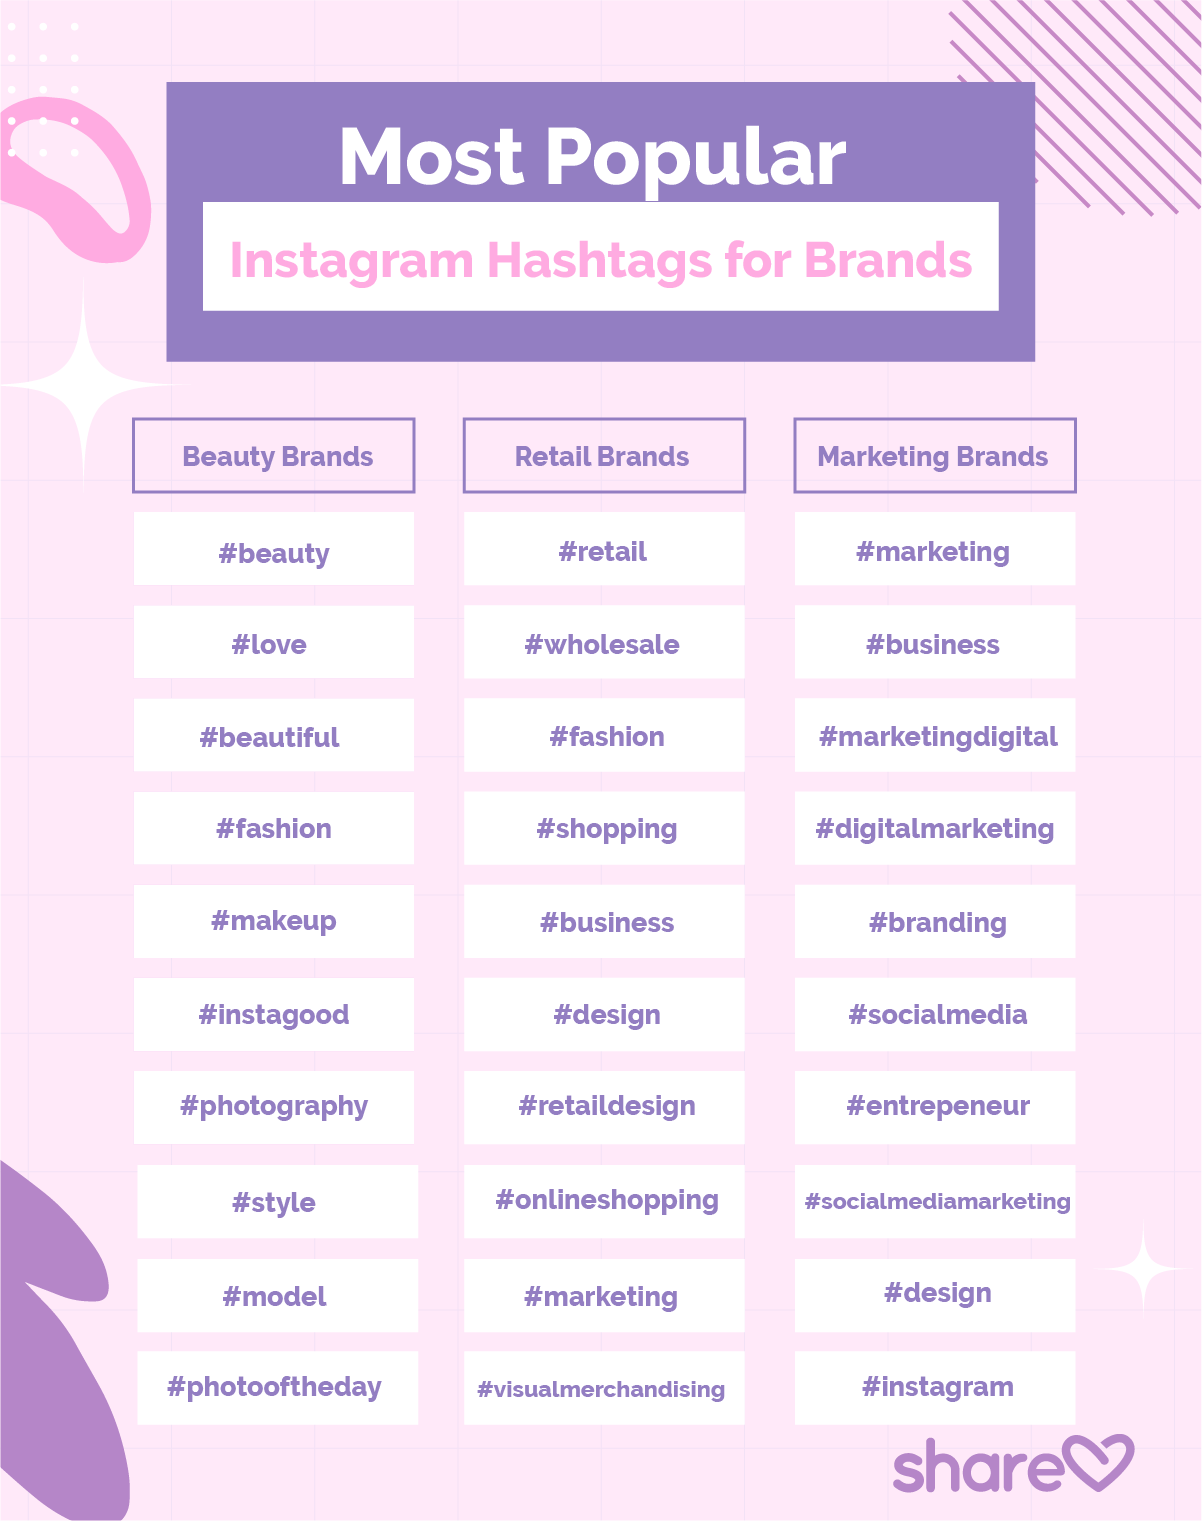 Most Popular Instagram Hashtags for Brands